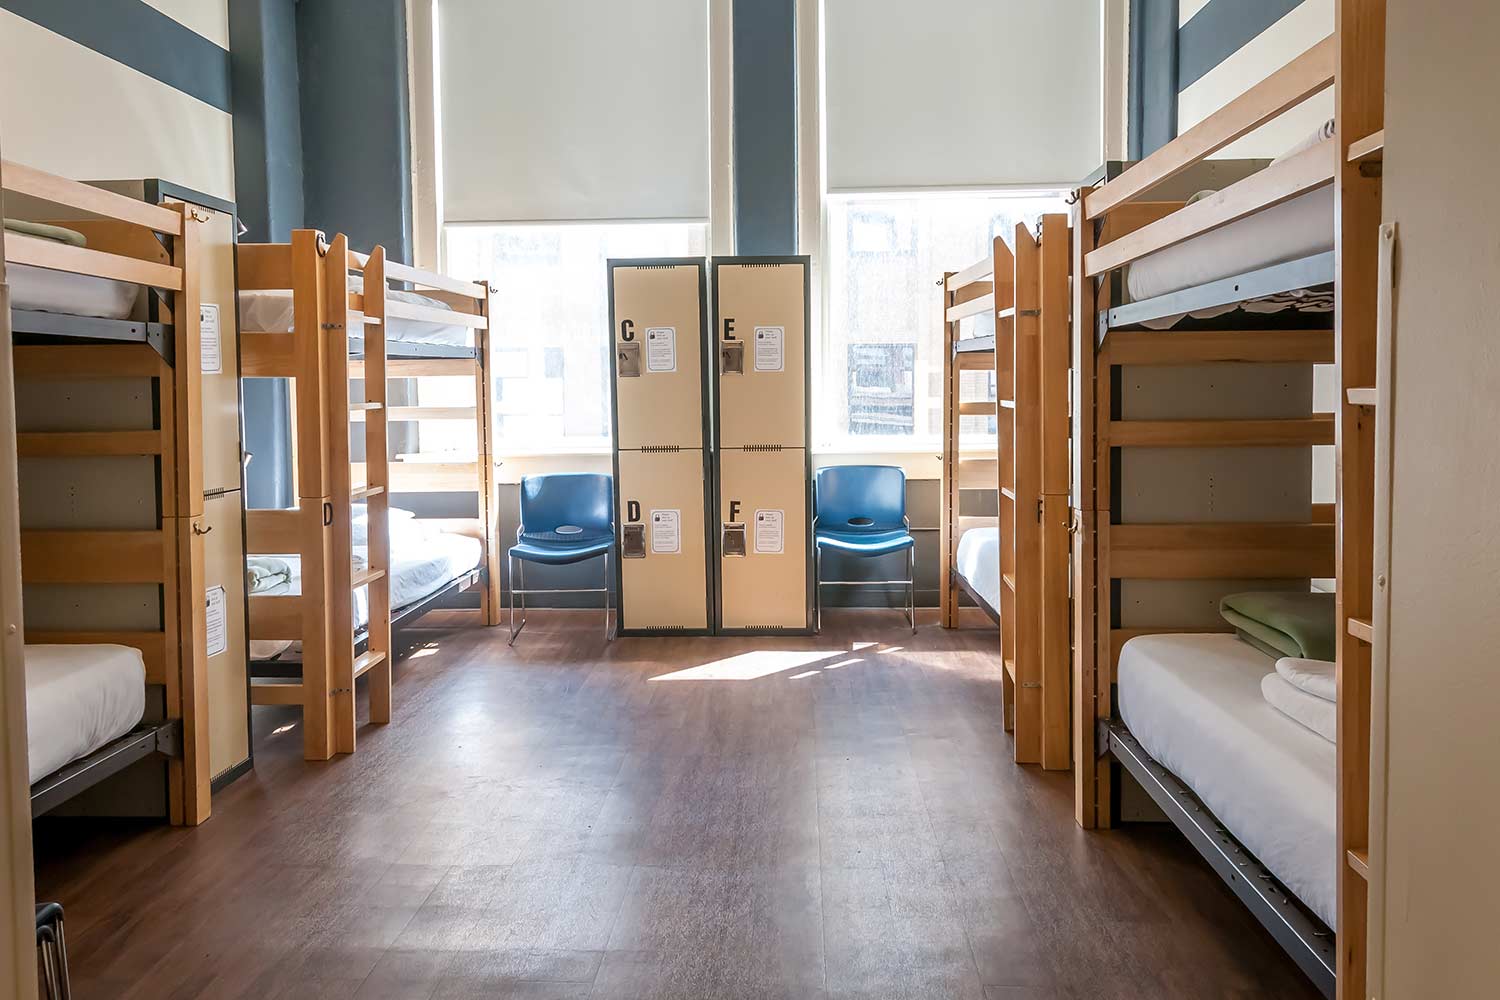 a dorm room at HI Chicago hostel with four sets of bunk beds, secure lockers for guest belongings, and two large windows